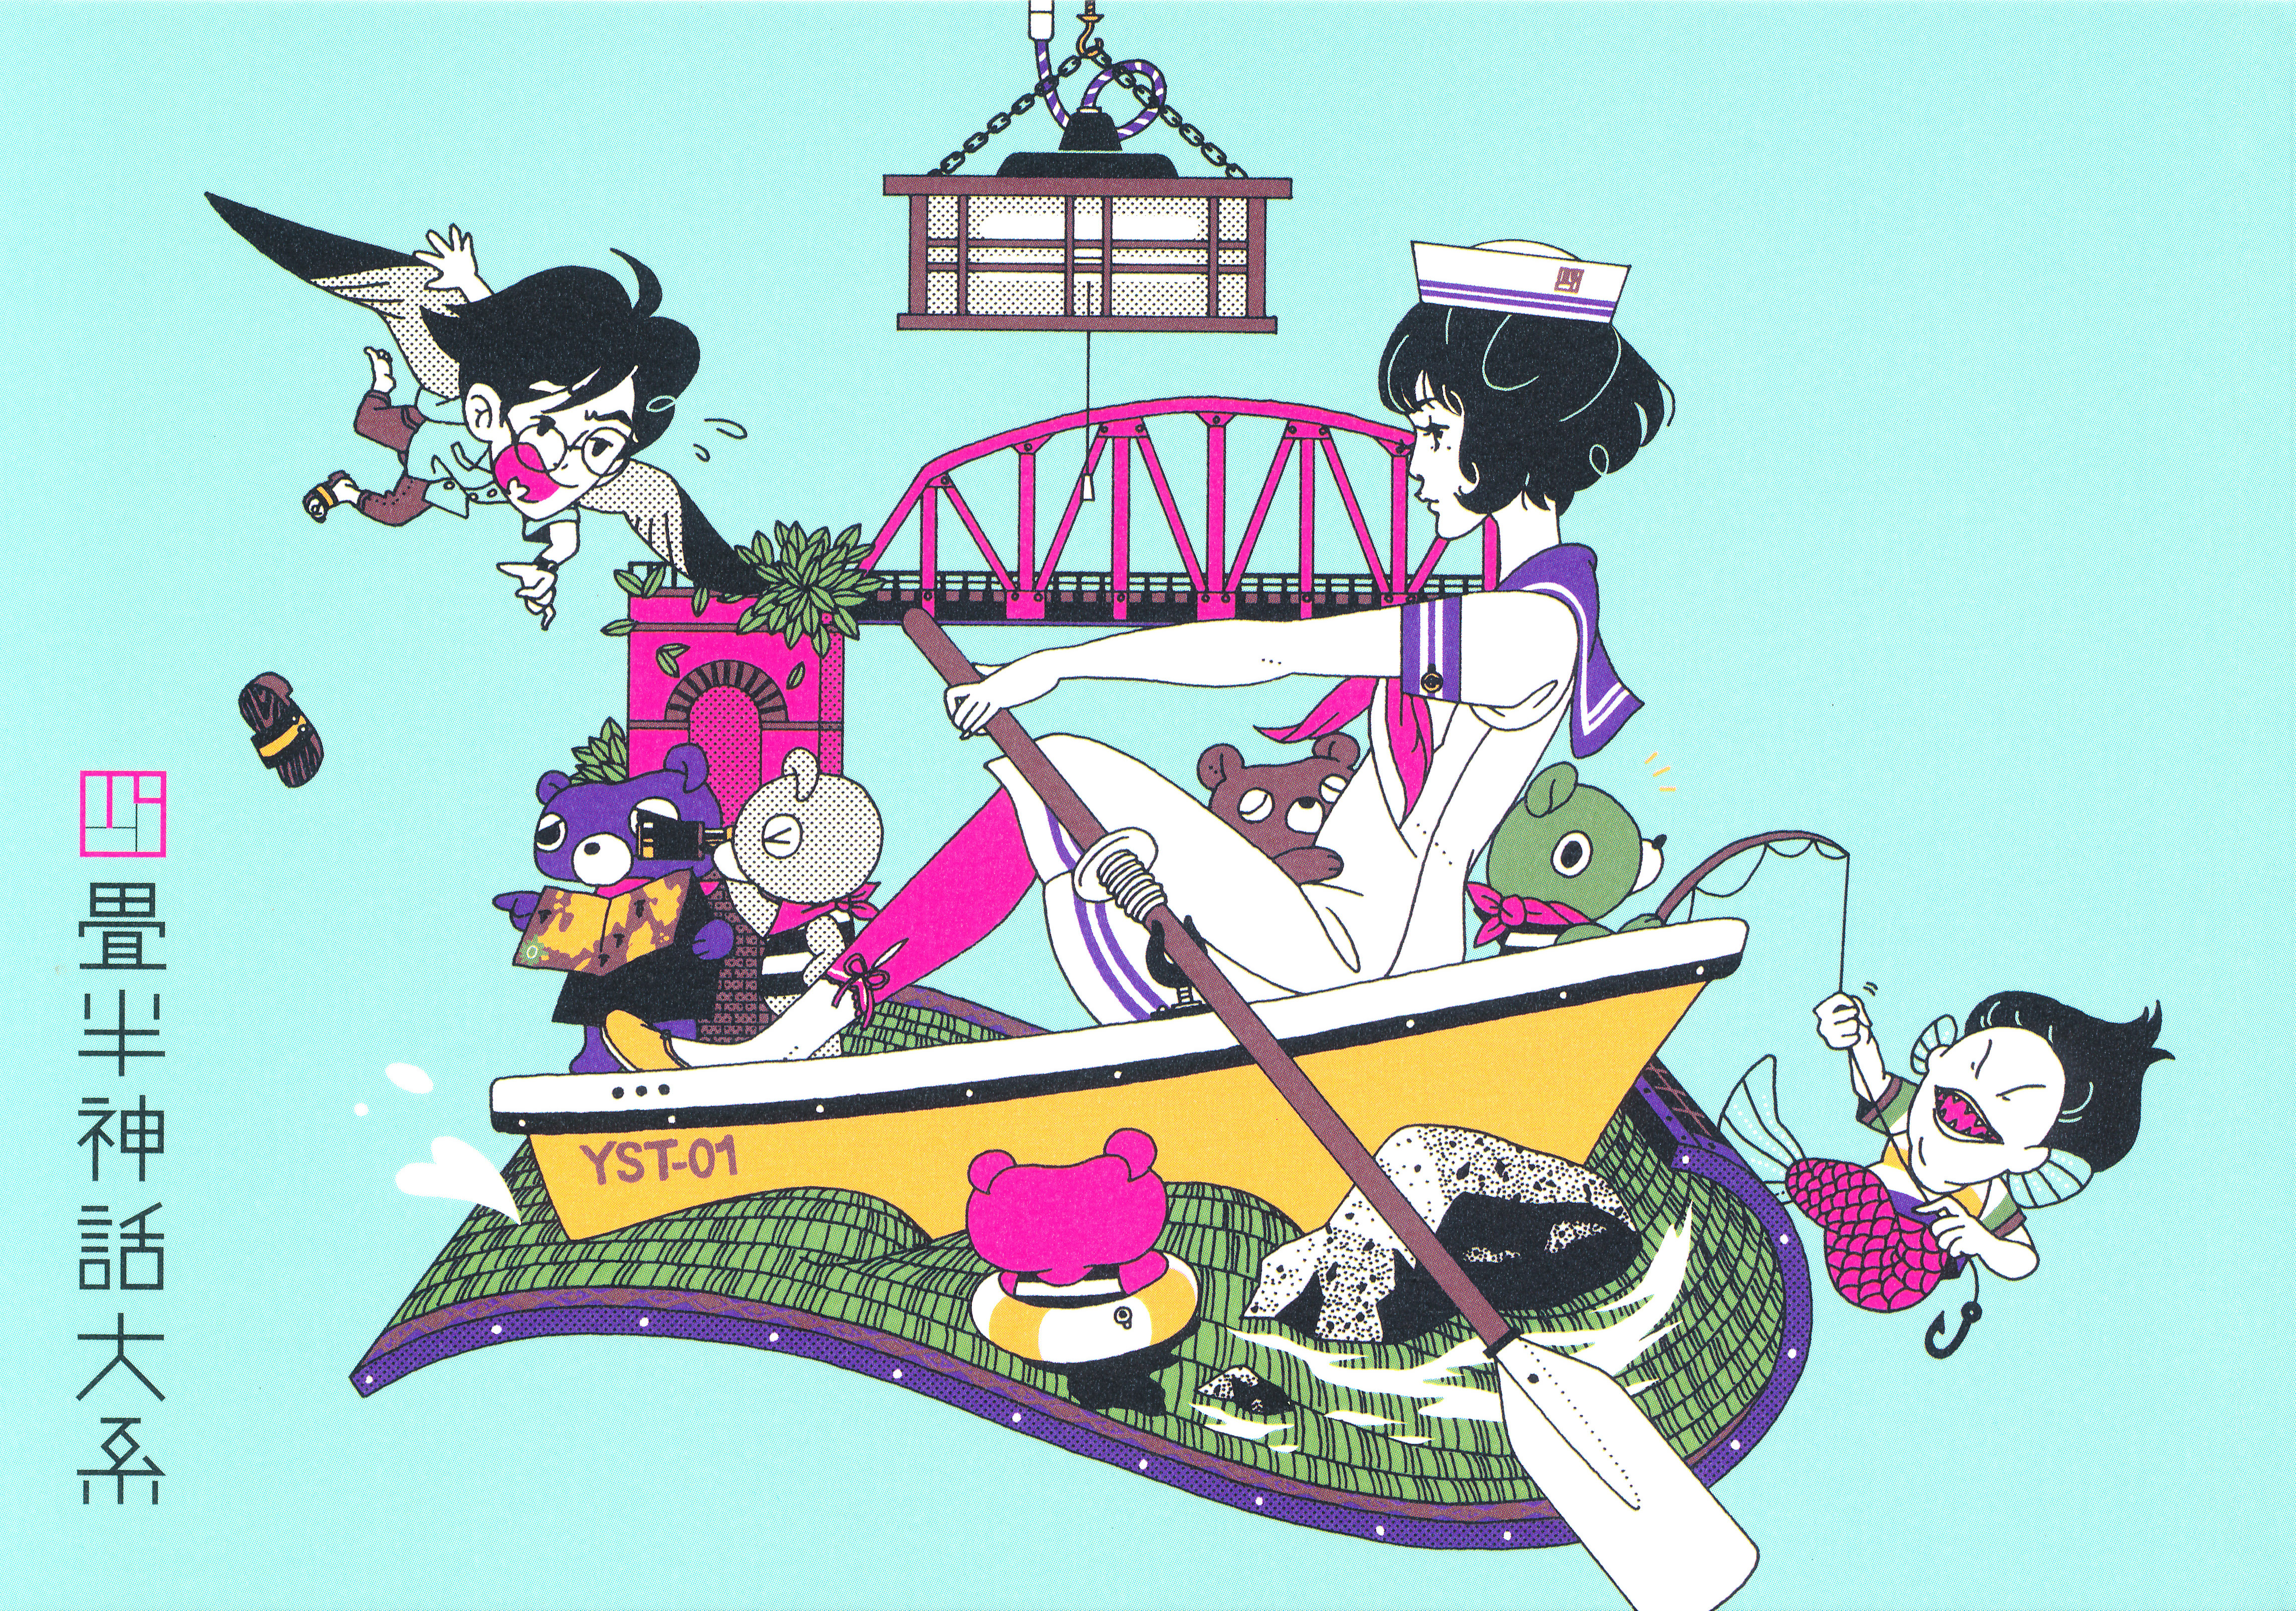 Amazing The Tatami Galaxy Pictures & Backgrounds